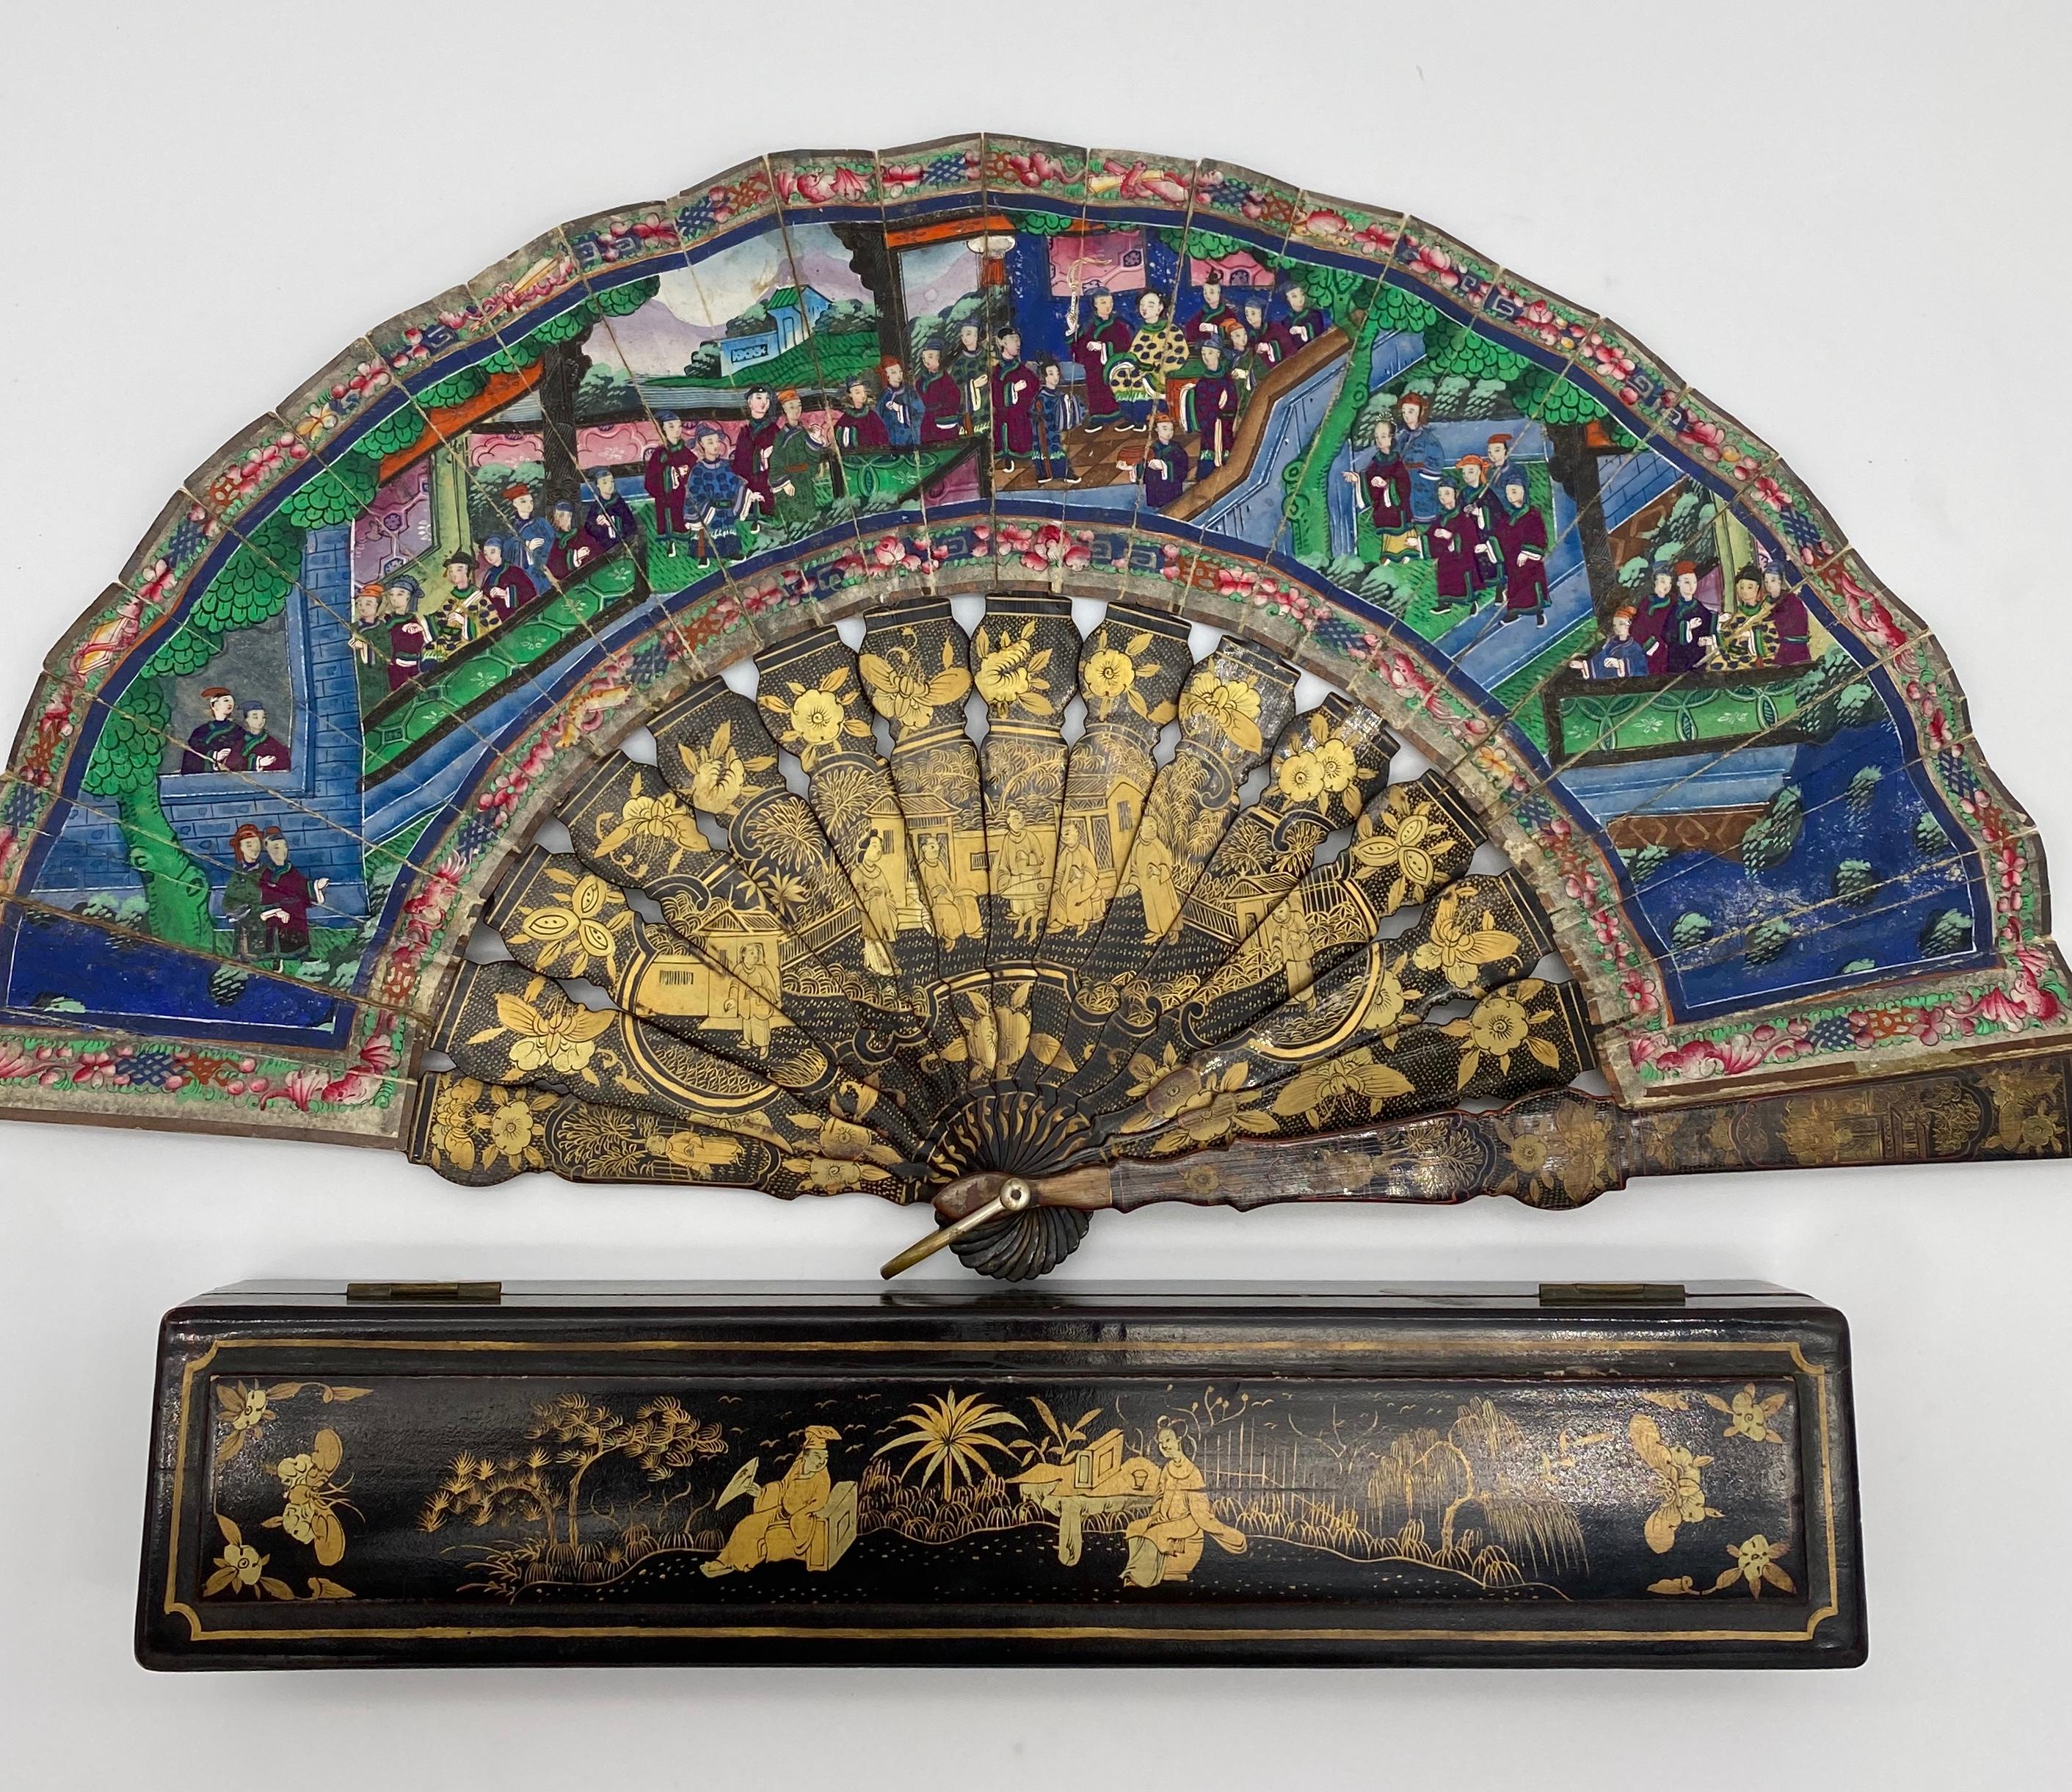 19th Century Chinese Gilt Lacquer Fan with Landscape 100 Faces